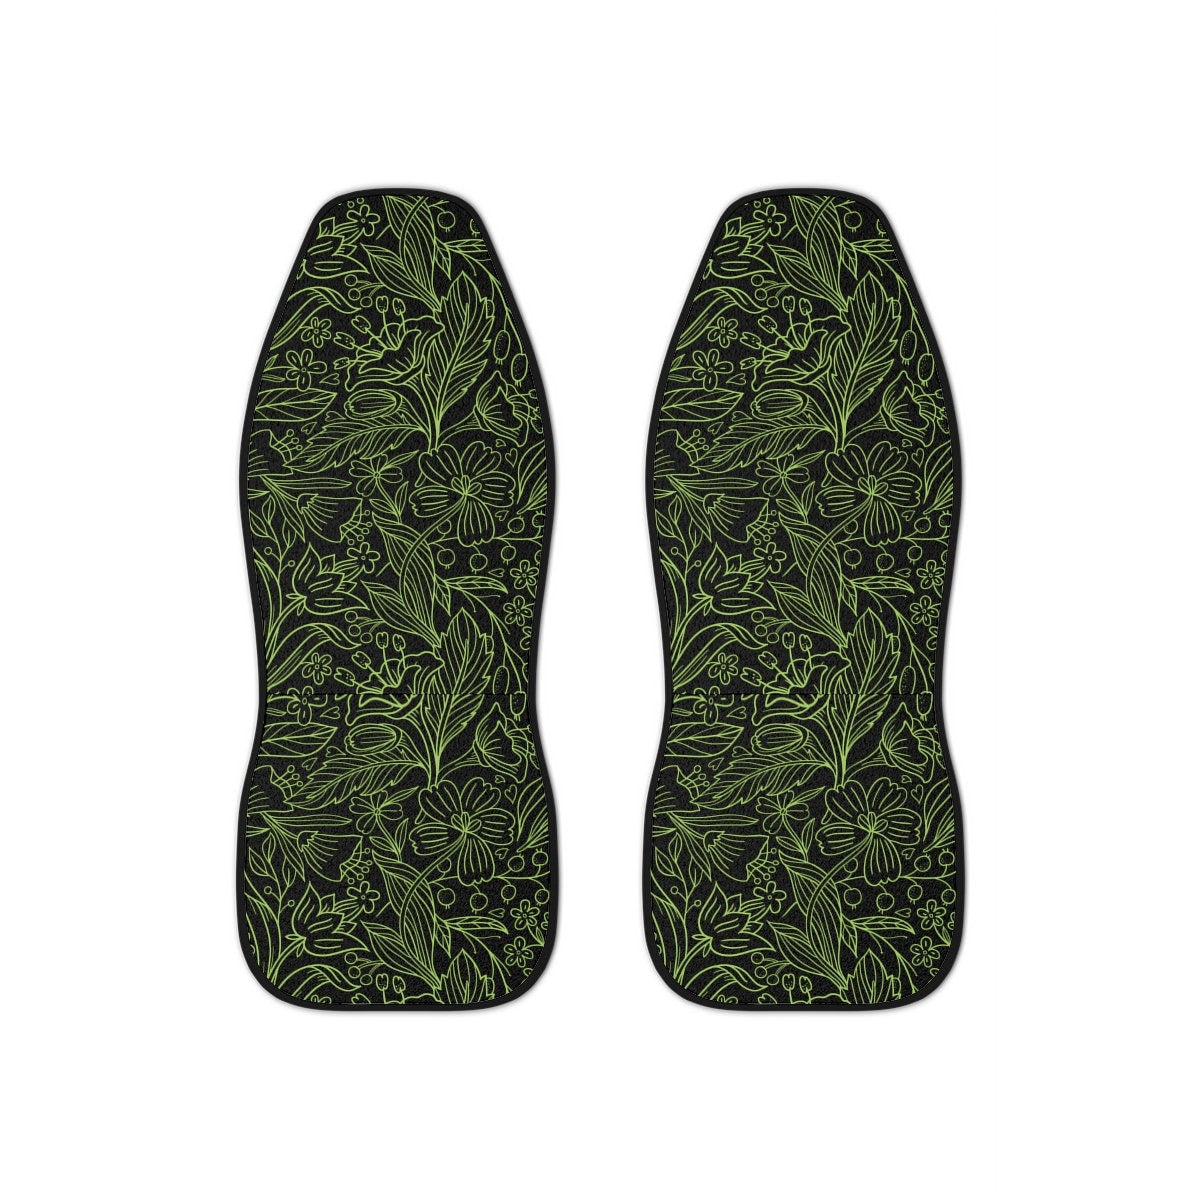 Sage Green Seat Covers for Cars, Boho Car Seat Cover, Car Accessories for Women, Hippie Car Decor, Cottagecore Floral Universal Vehicle Mat